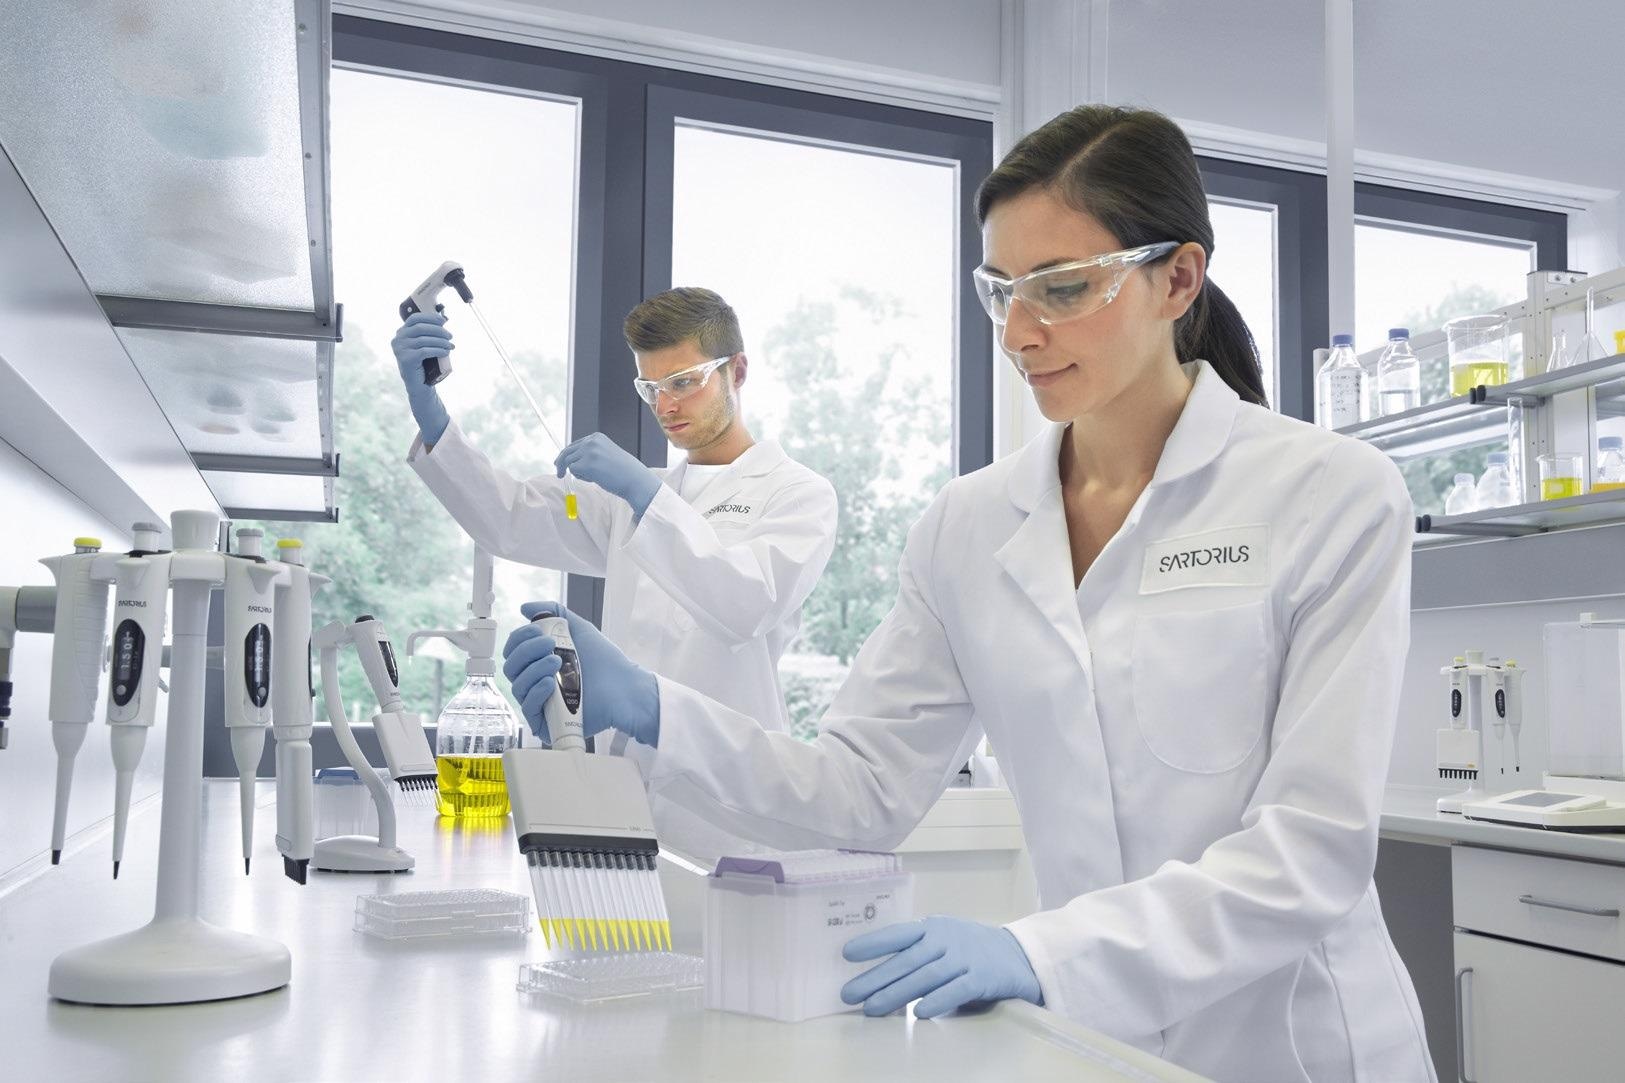 The best methods to avoid contamination in pipetting